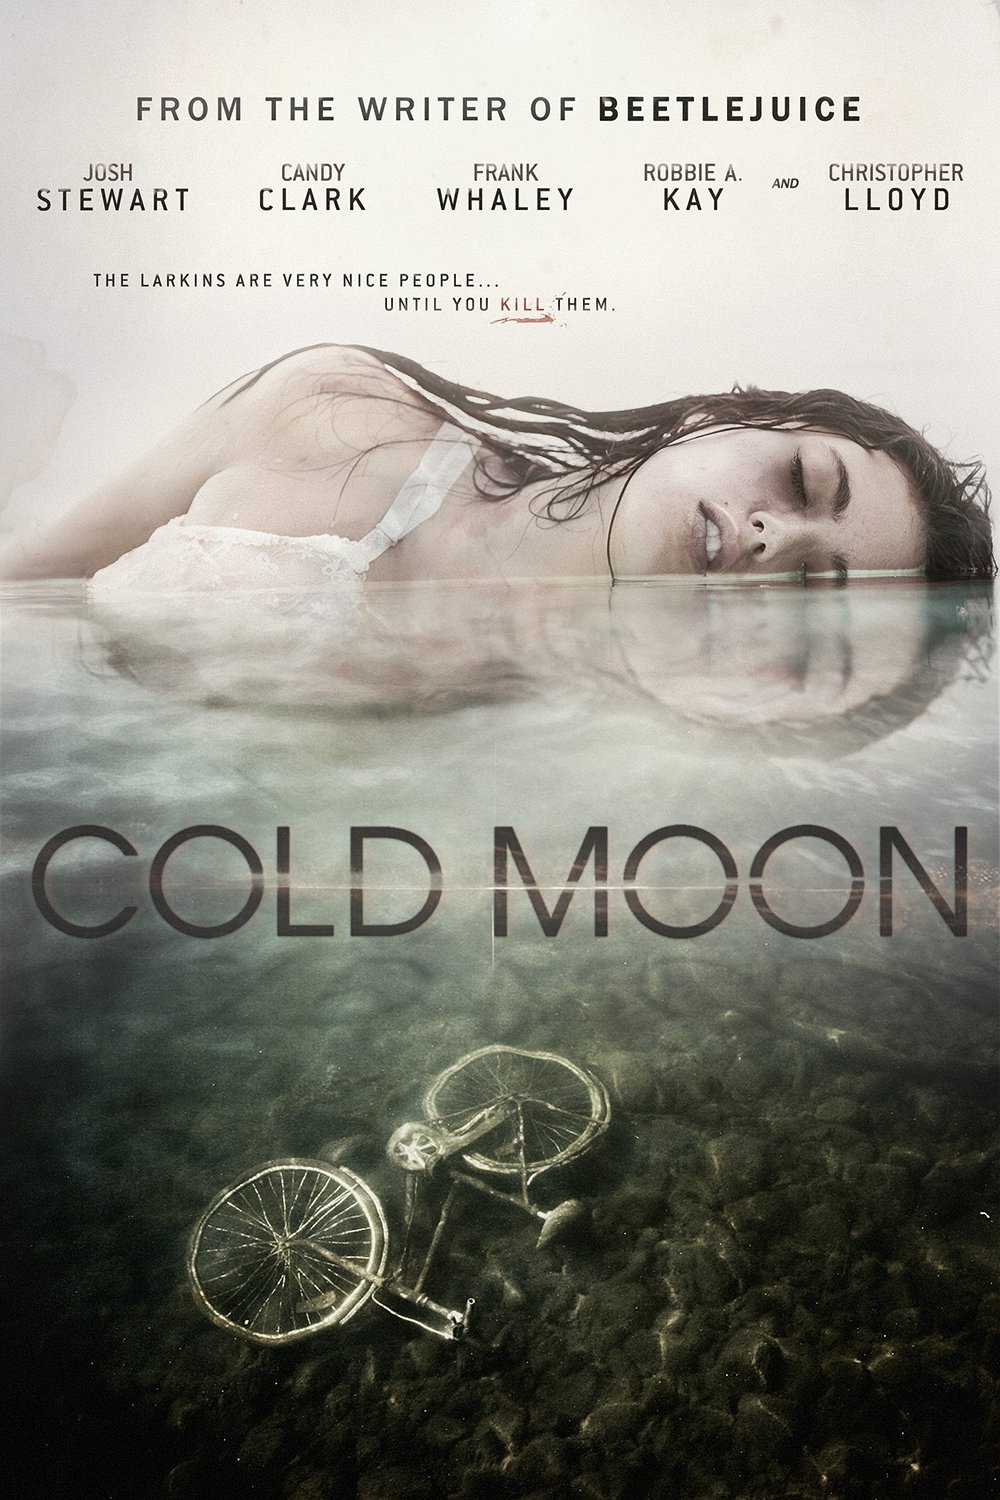 Poster of the movie Cold Moon